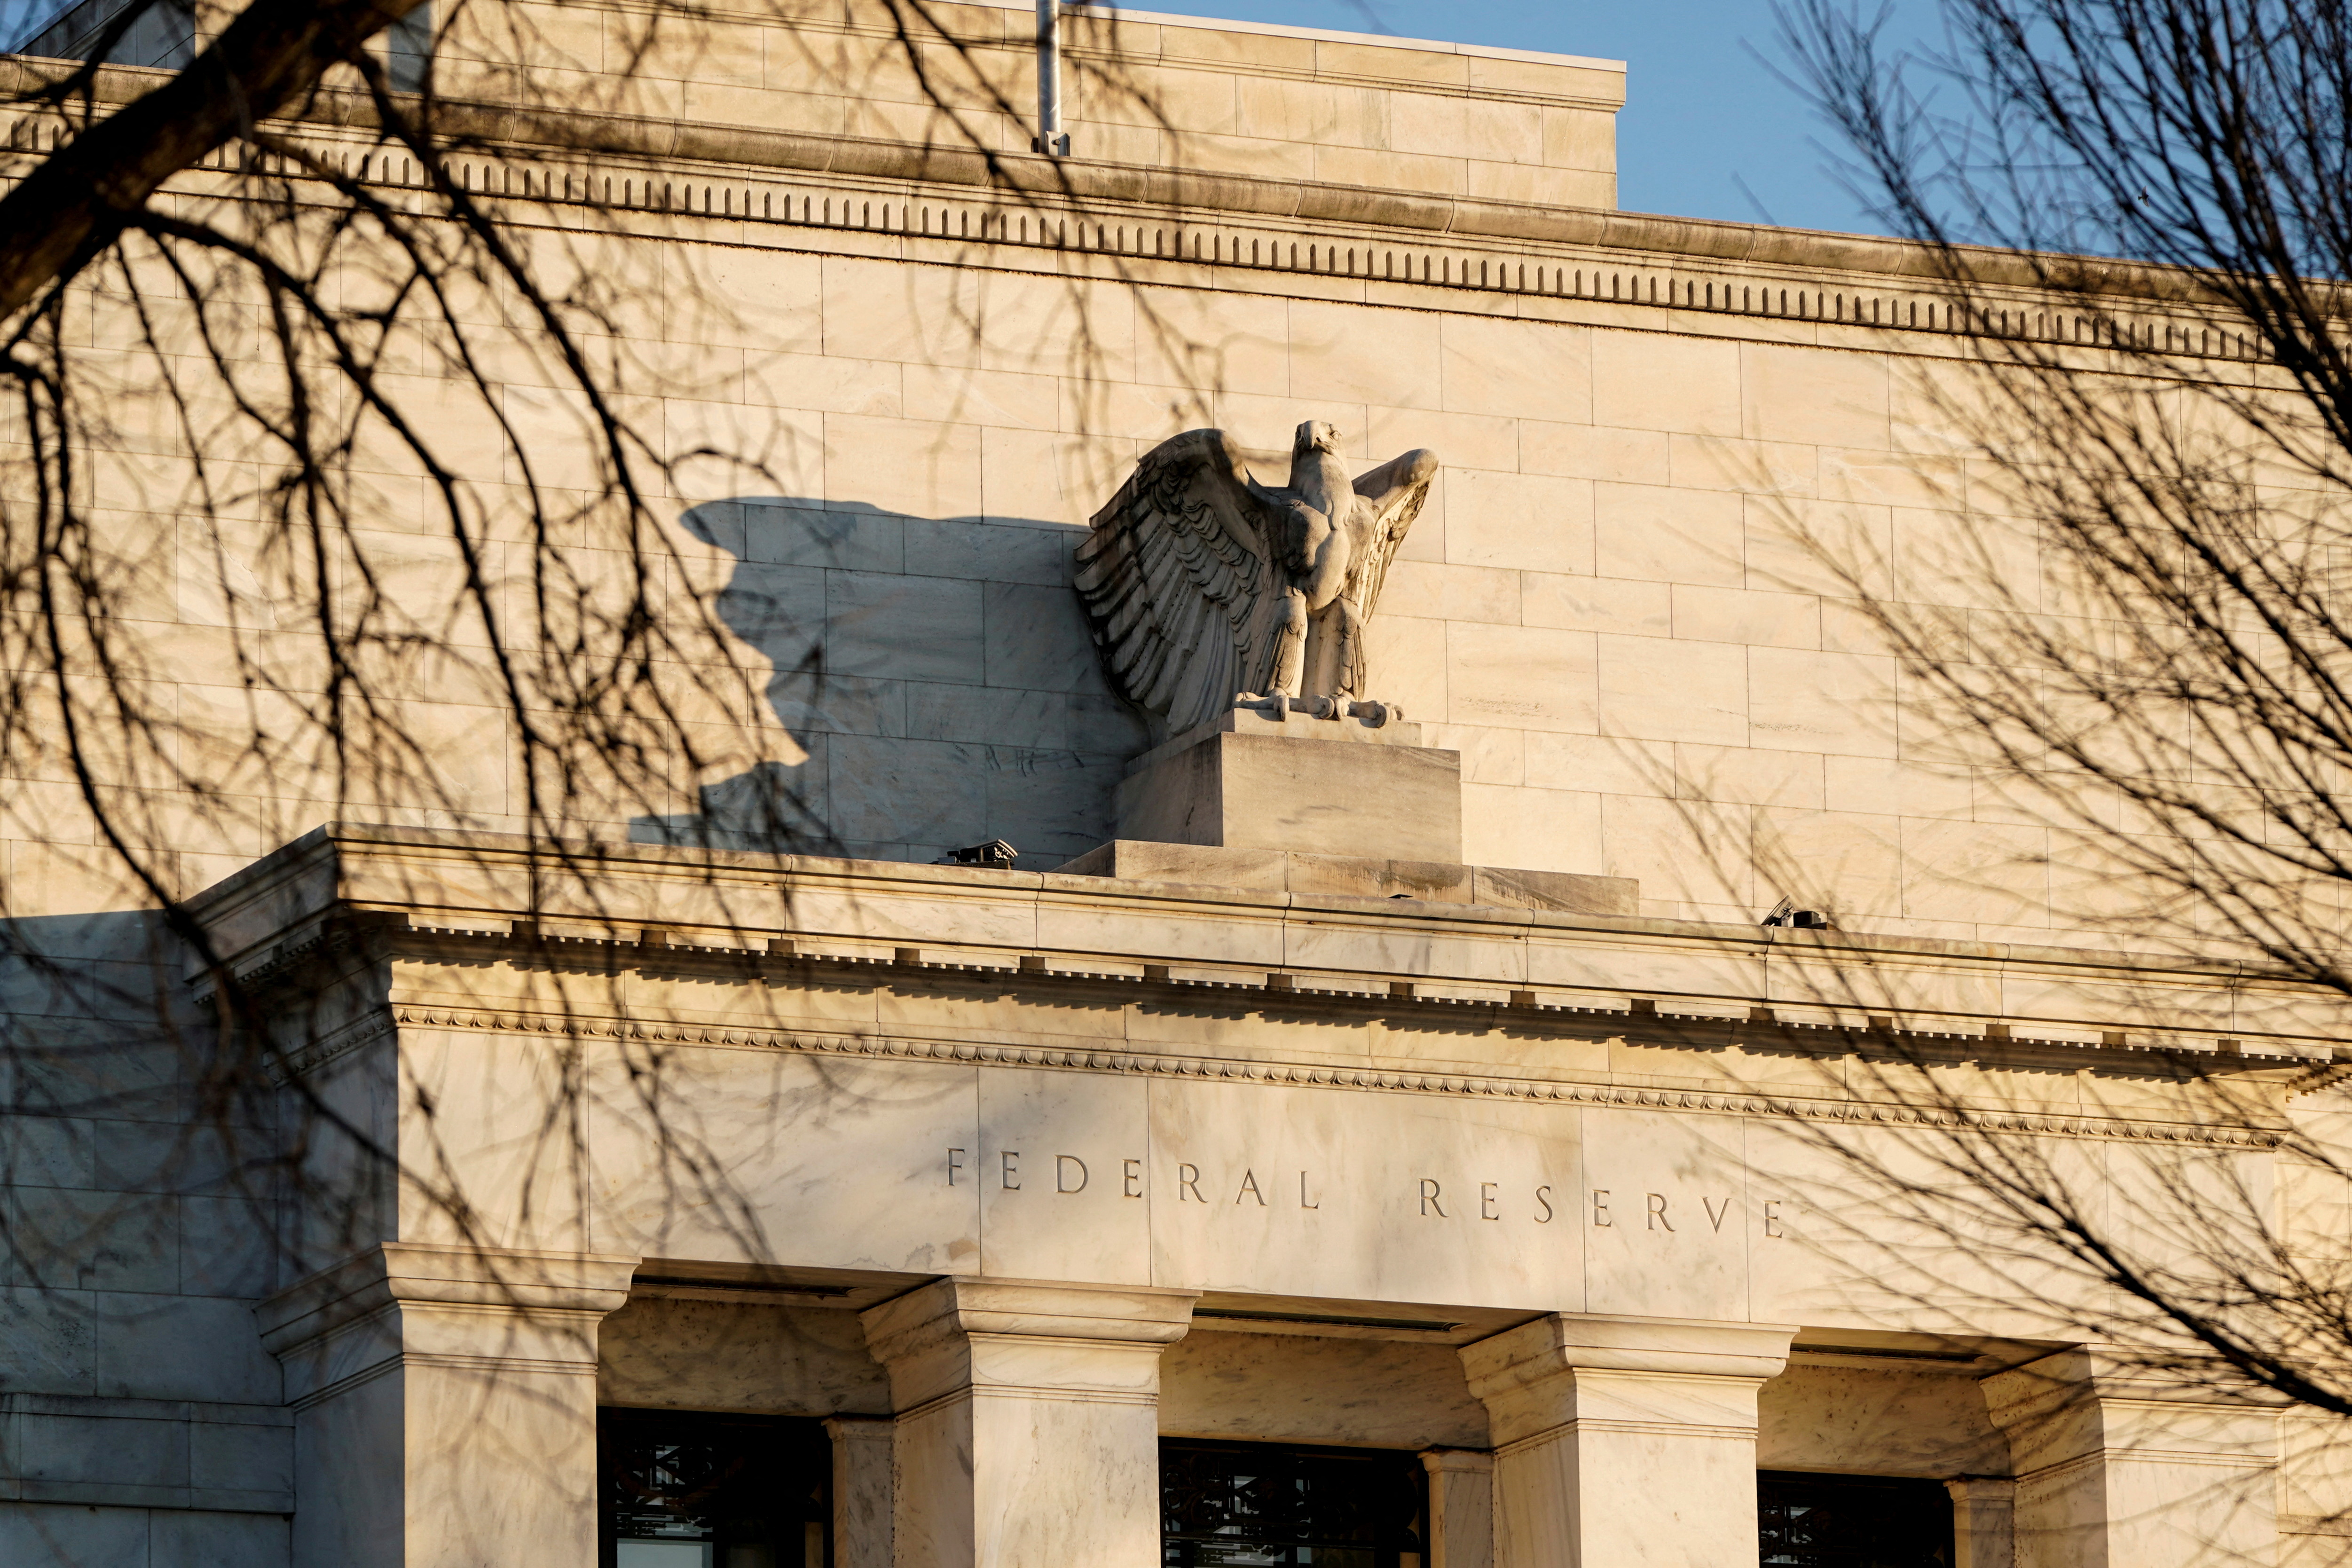 The Federal Reserve building is seen in Washington, DC